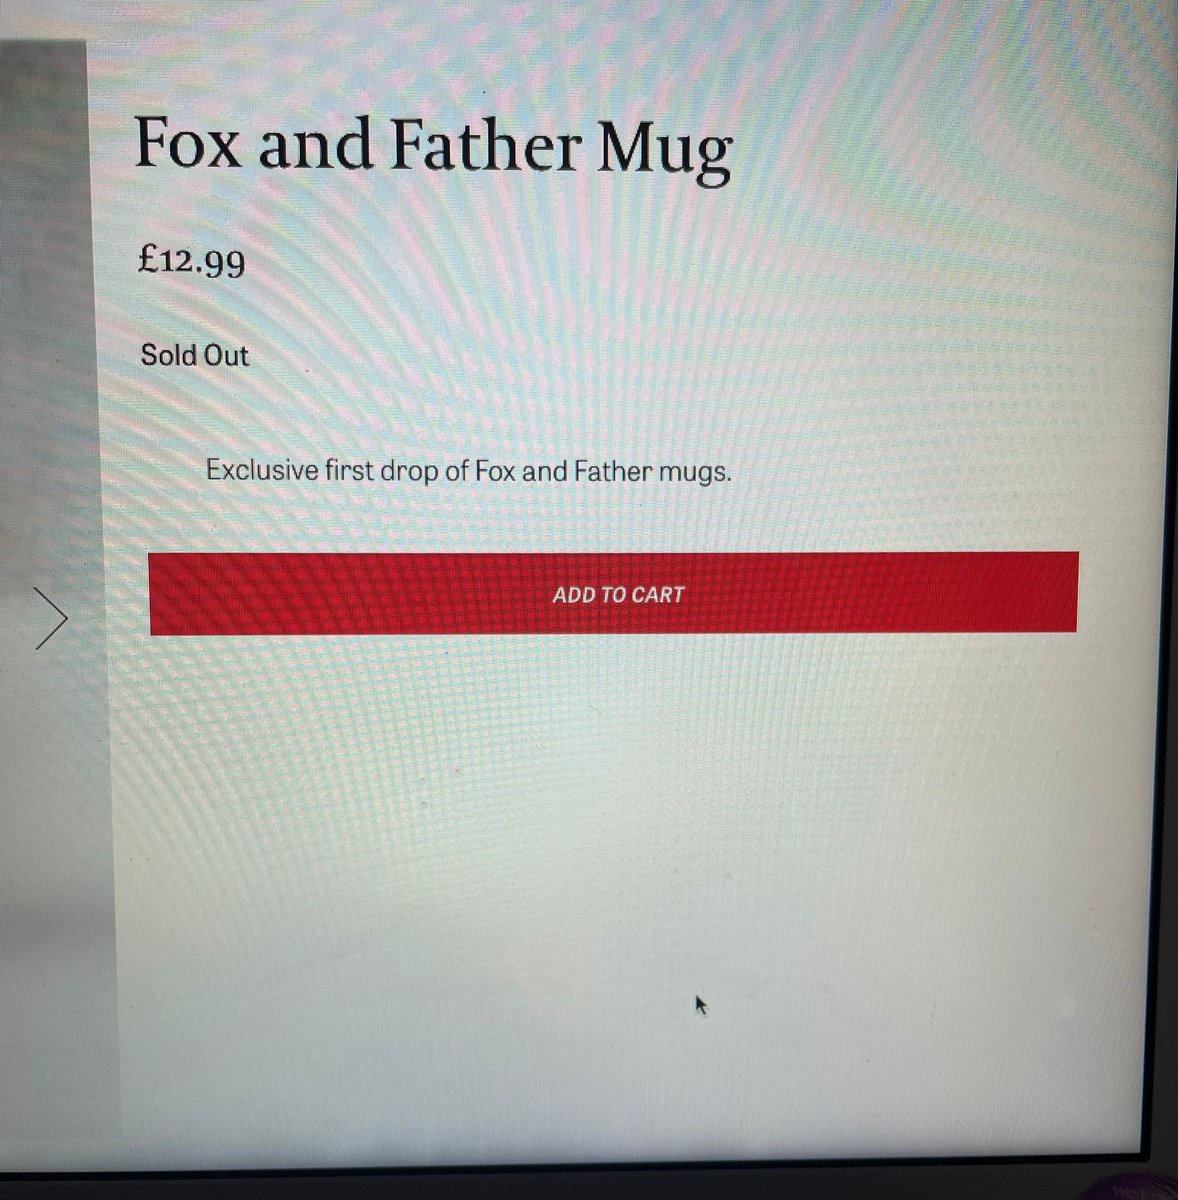 Sold out already. Amazing. New stock incoming. #FoxAndFather